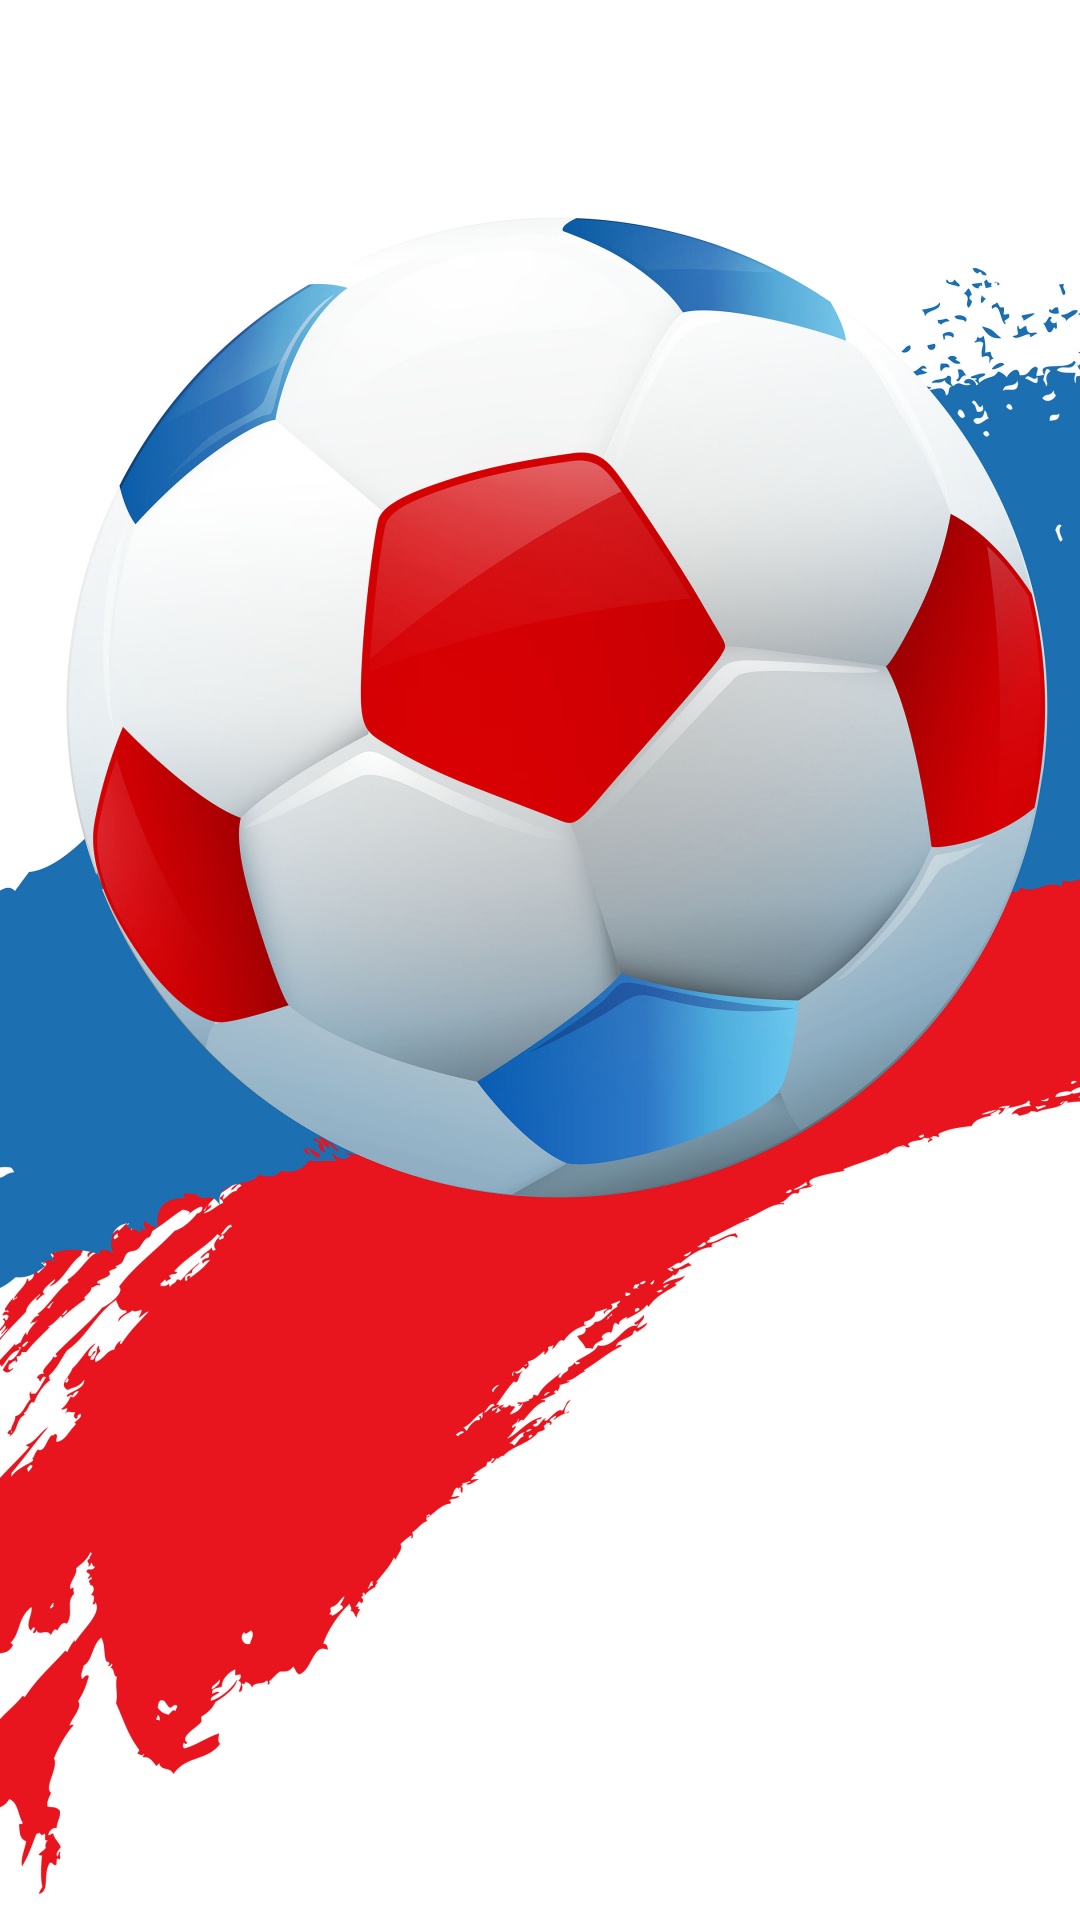 White and Red Soccer Ball. Wallpaper in 1080x1920 Resolution